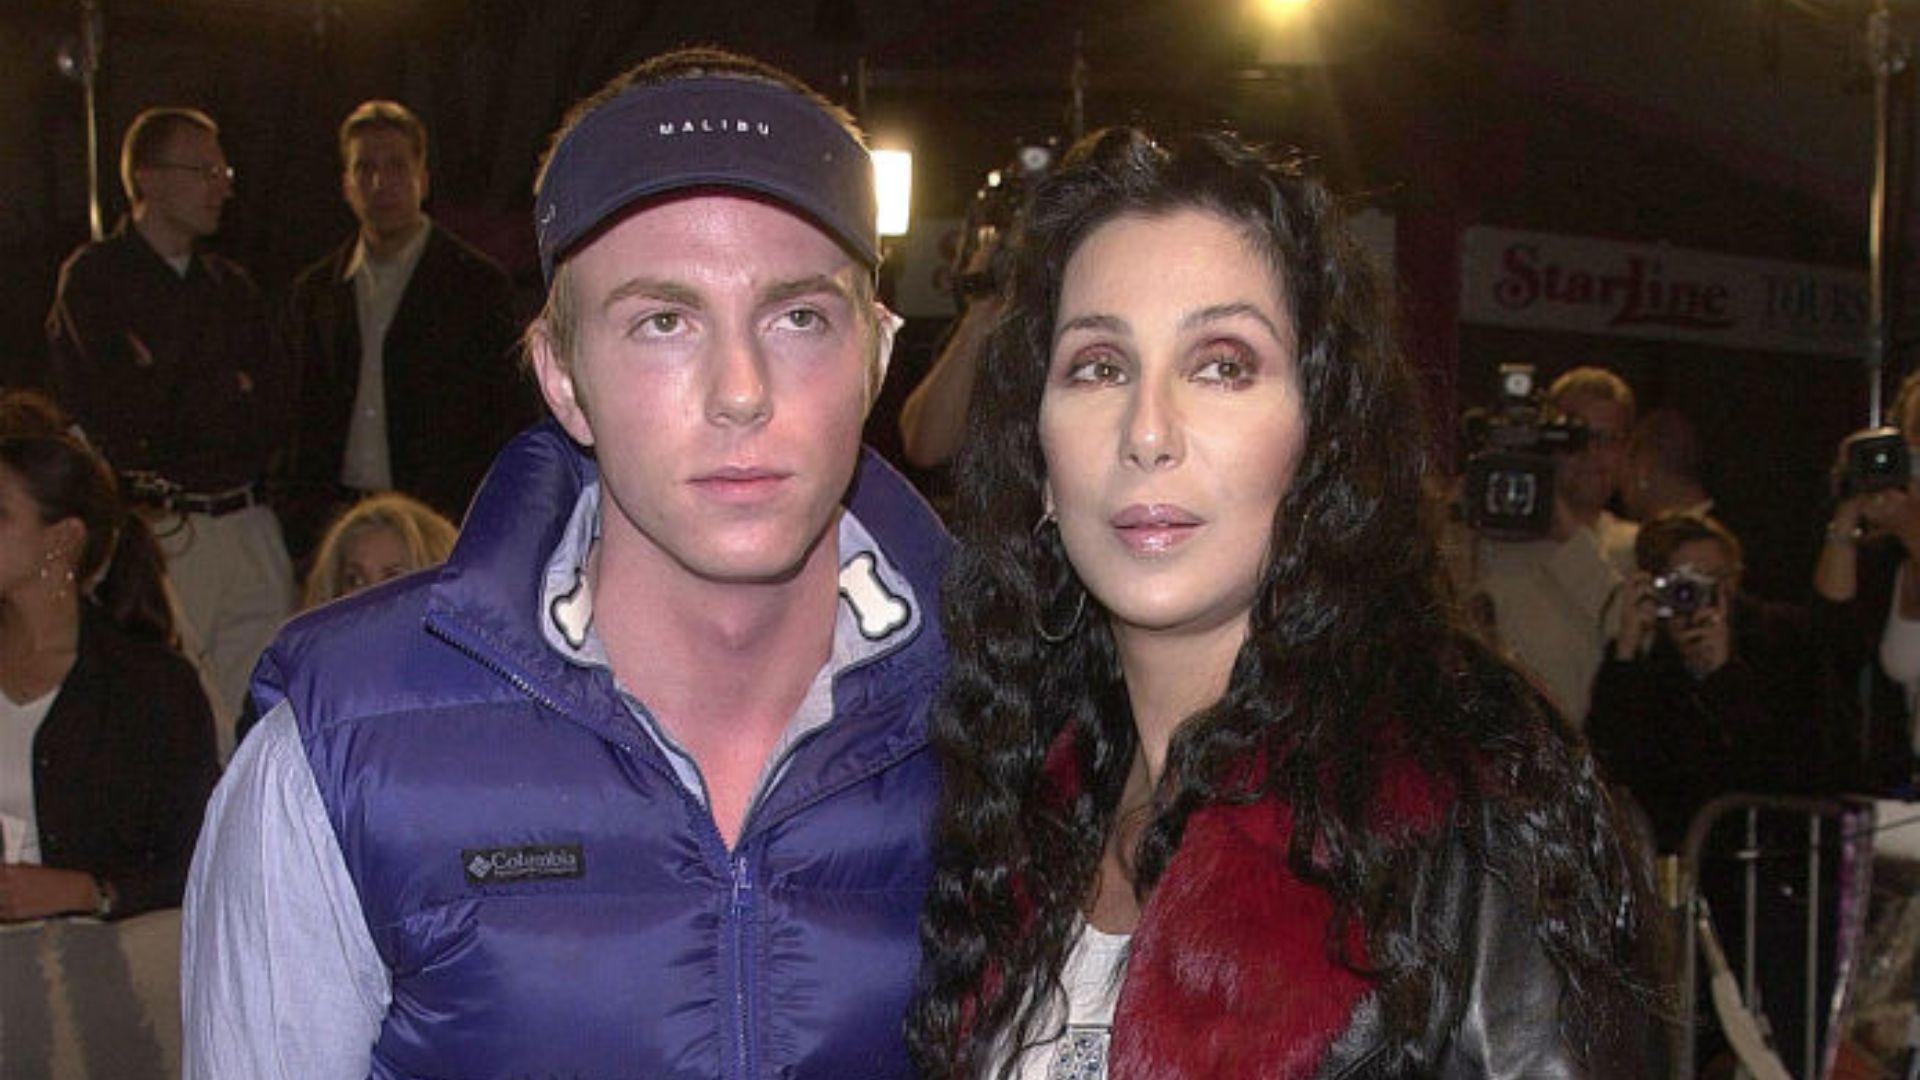 Cher and Elijah posing together at a public event. The man is wearing a blue and white Columbia jacket and a dark cap with the word "Malibu" on it, while the woman to his right is wearing a brown leather jacket with red fur trim